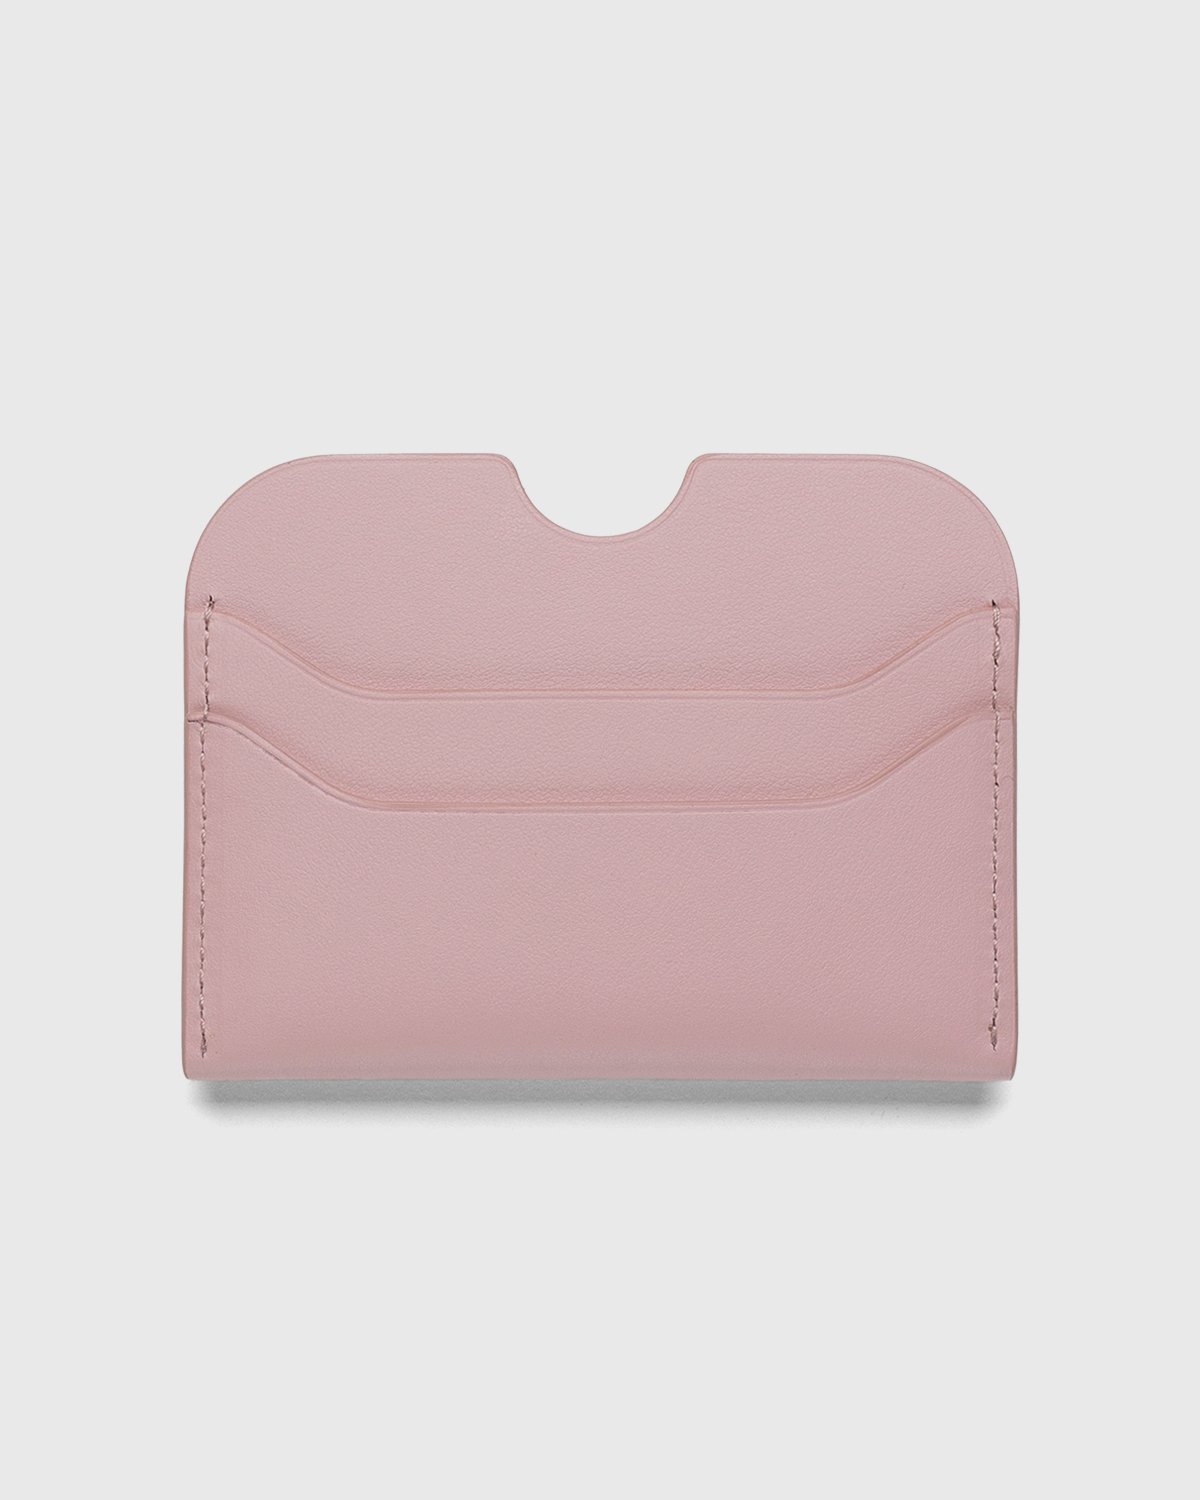 Acne Studios - Leather Card Case Powder Pink - Accessories - Pink - Image 2